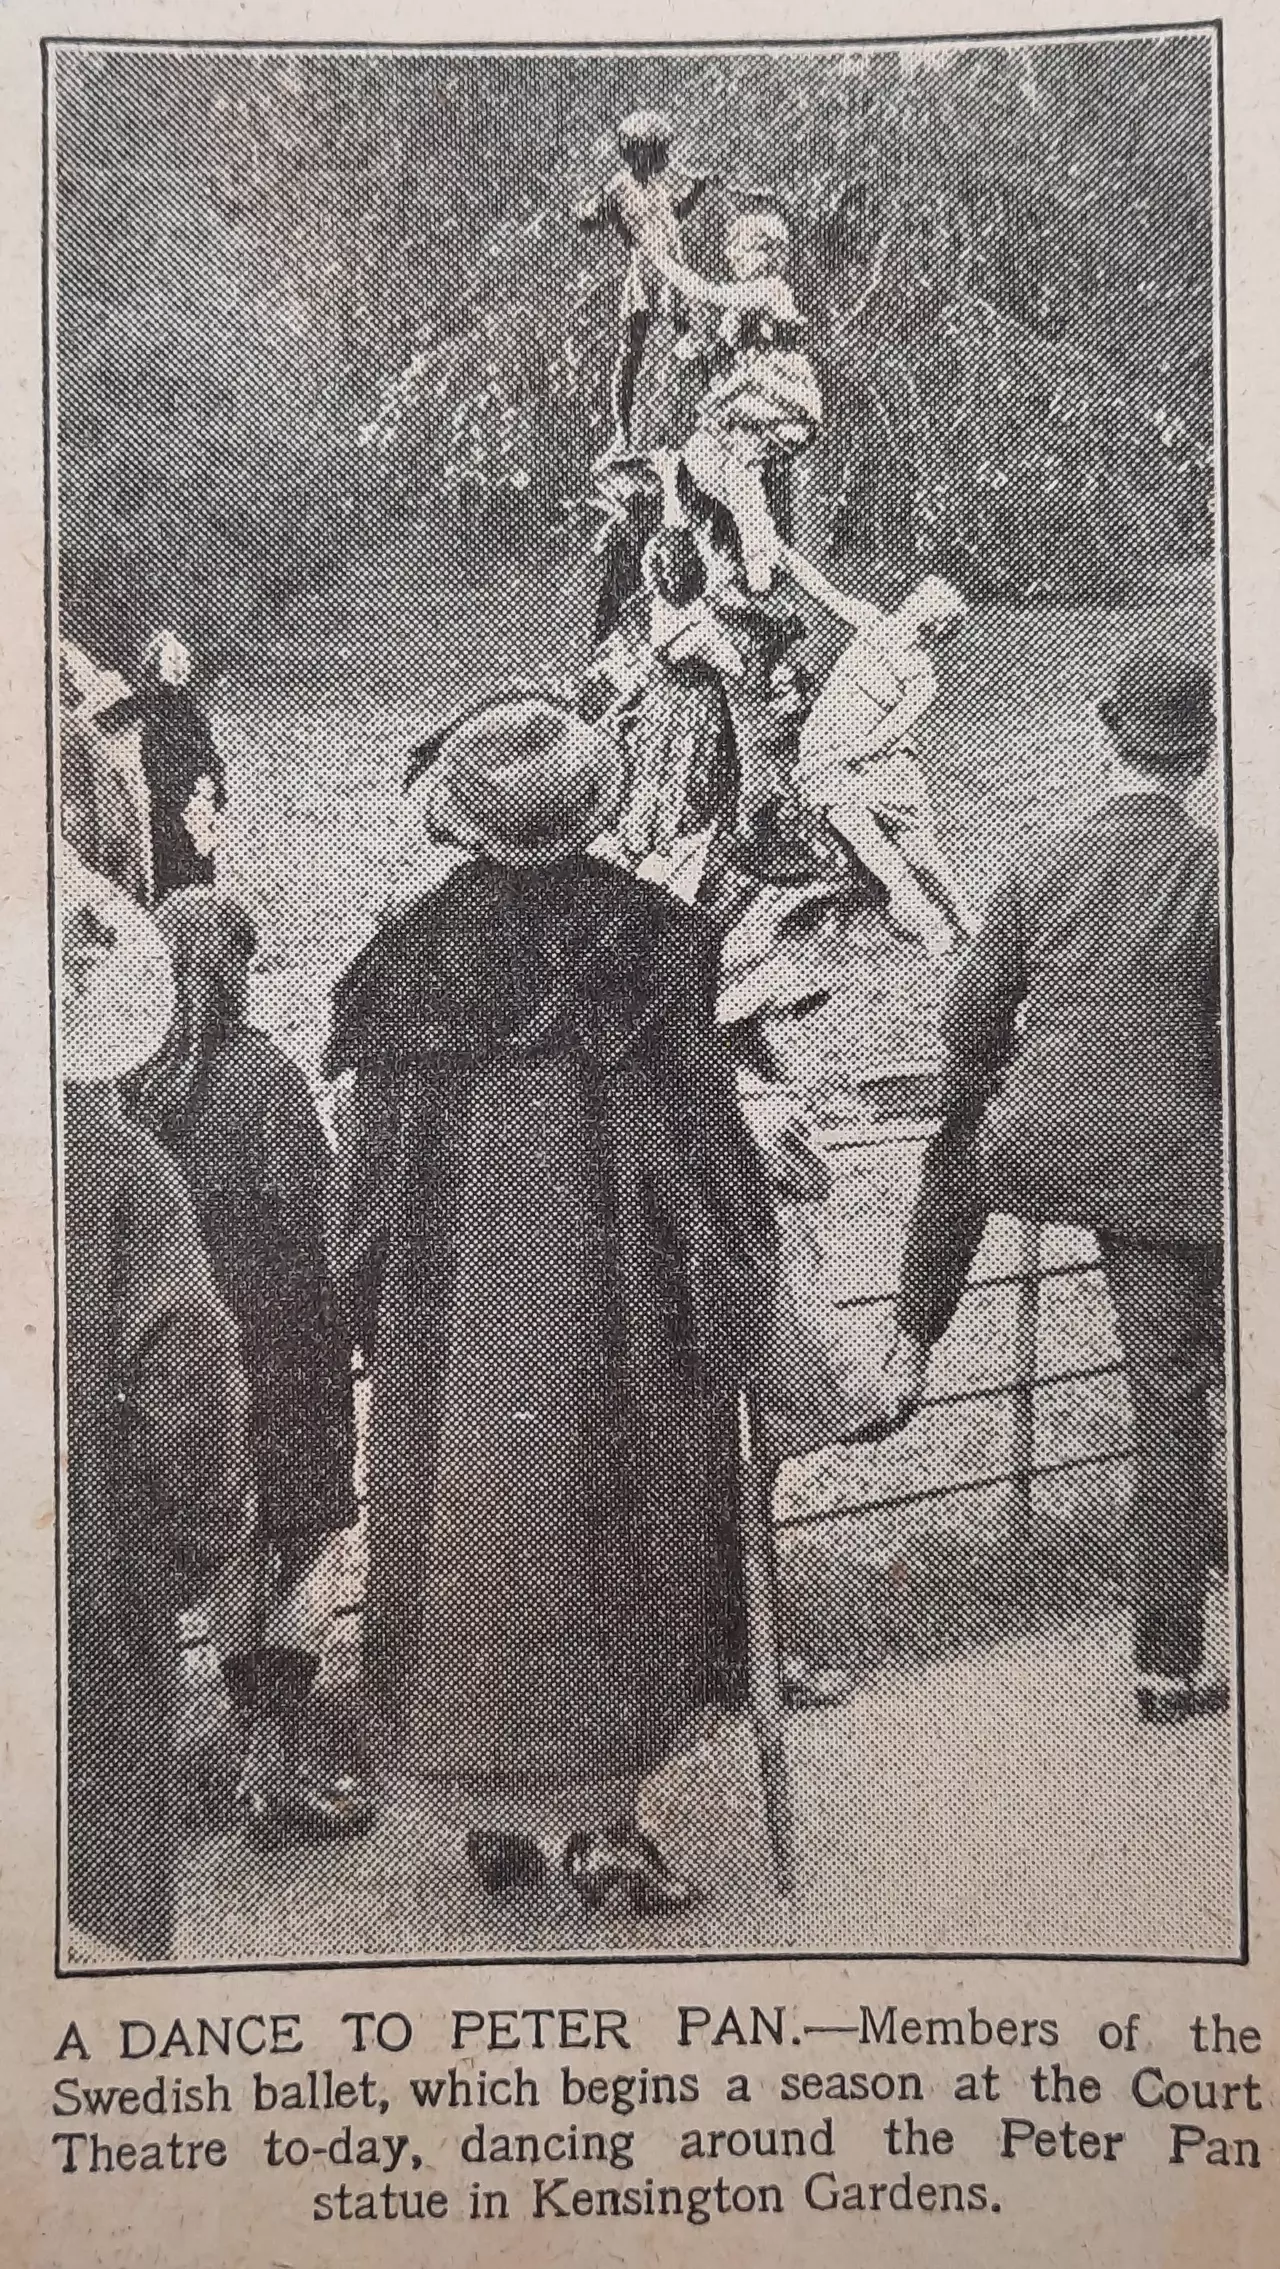 A press clipping from 1912 about ballet dancers climbing the Peter Pan statue